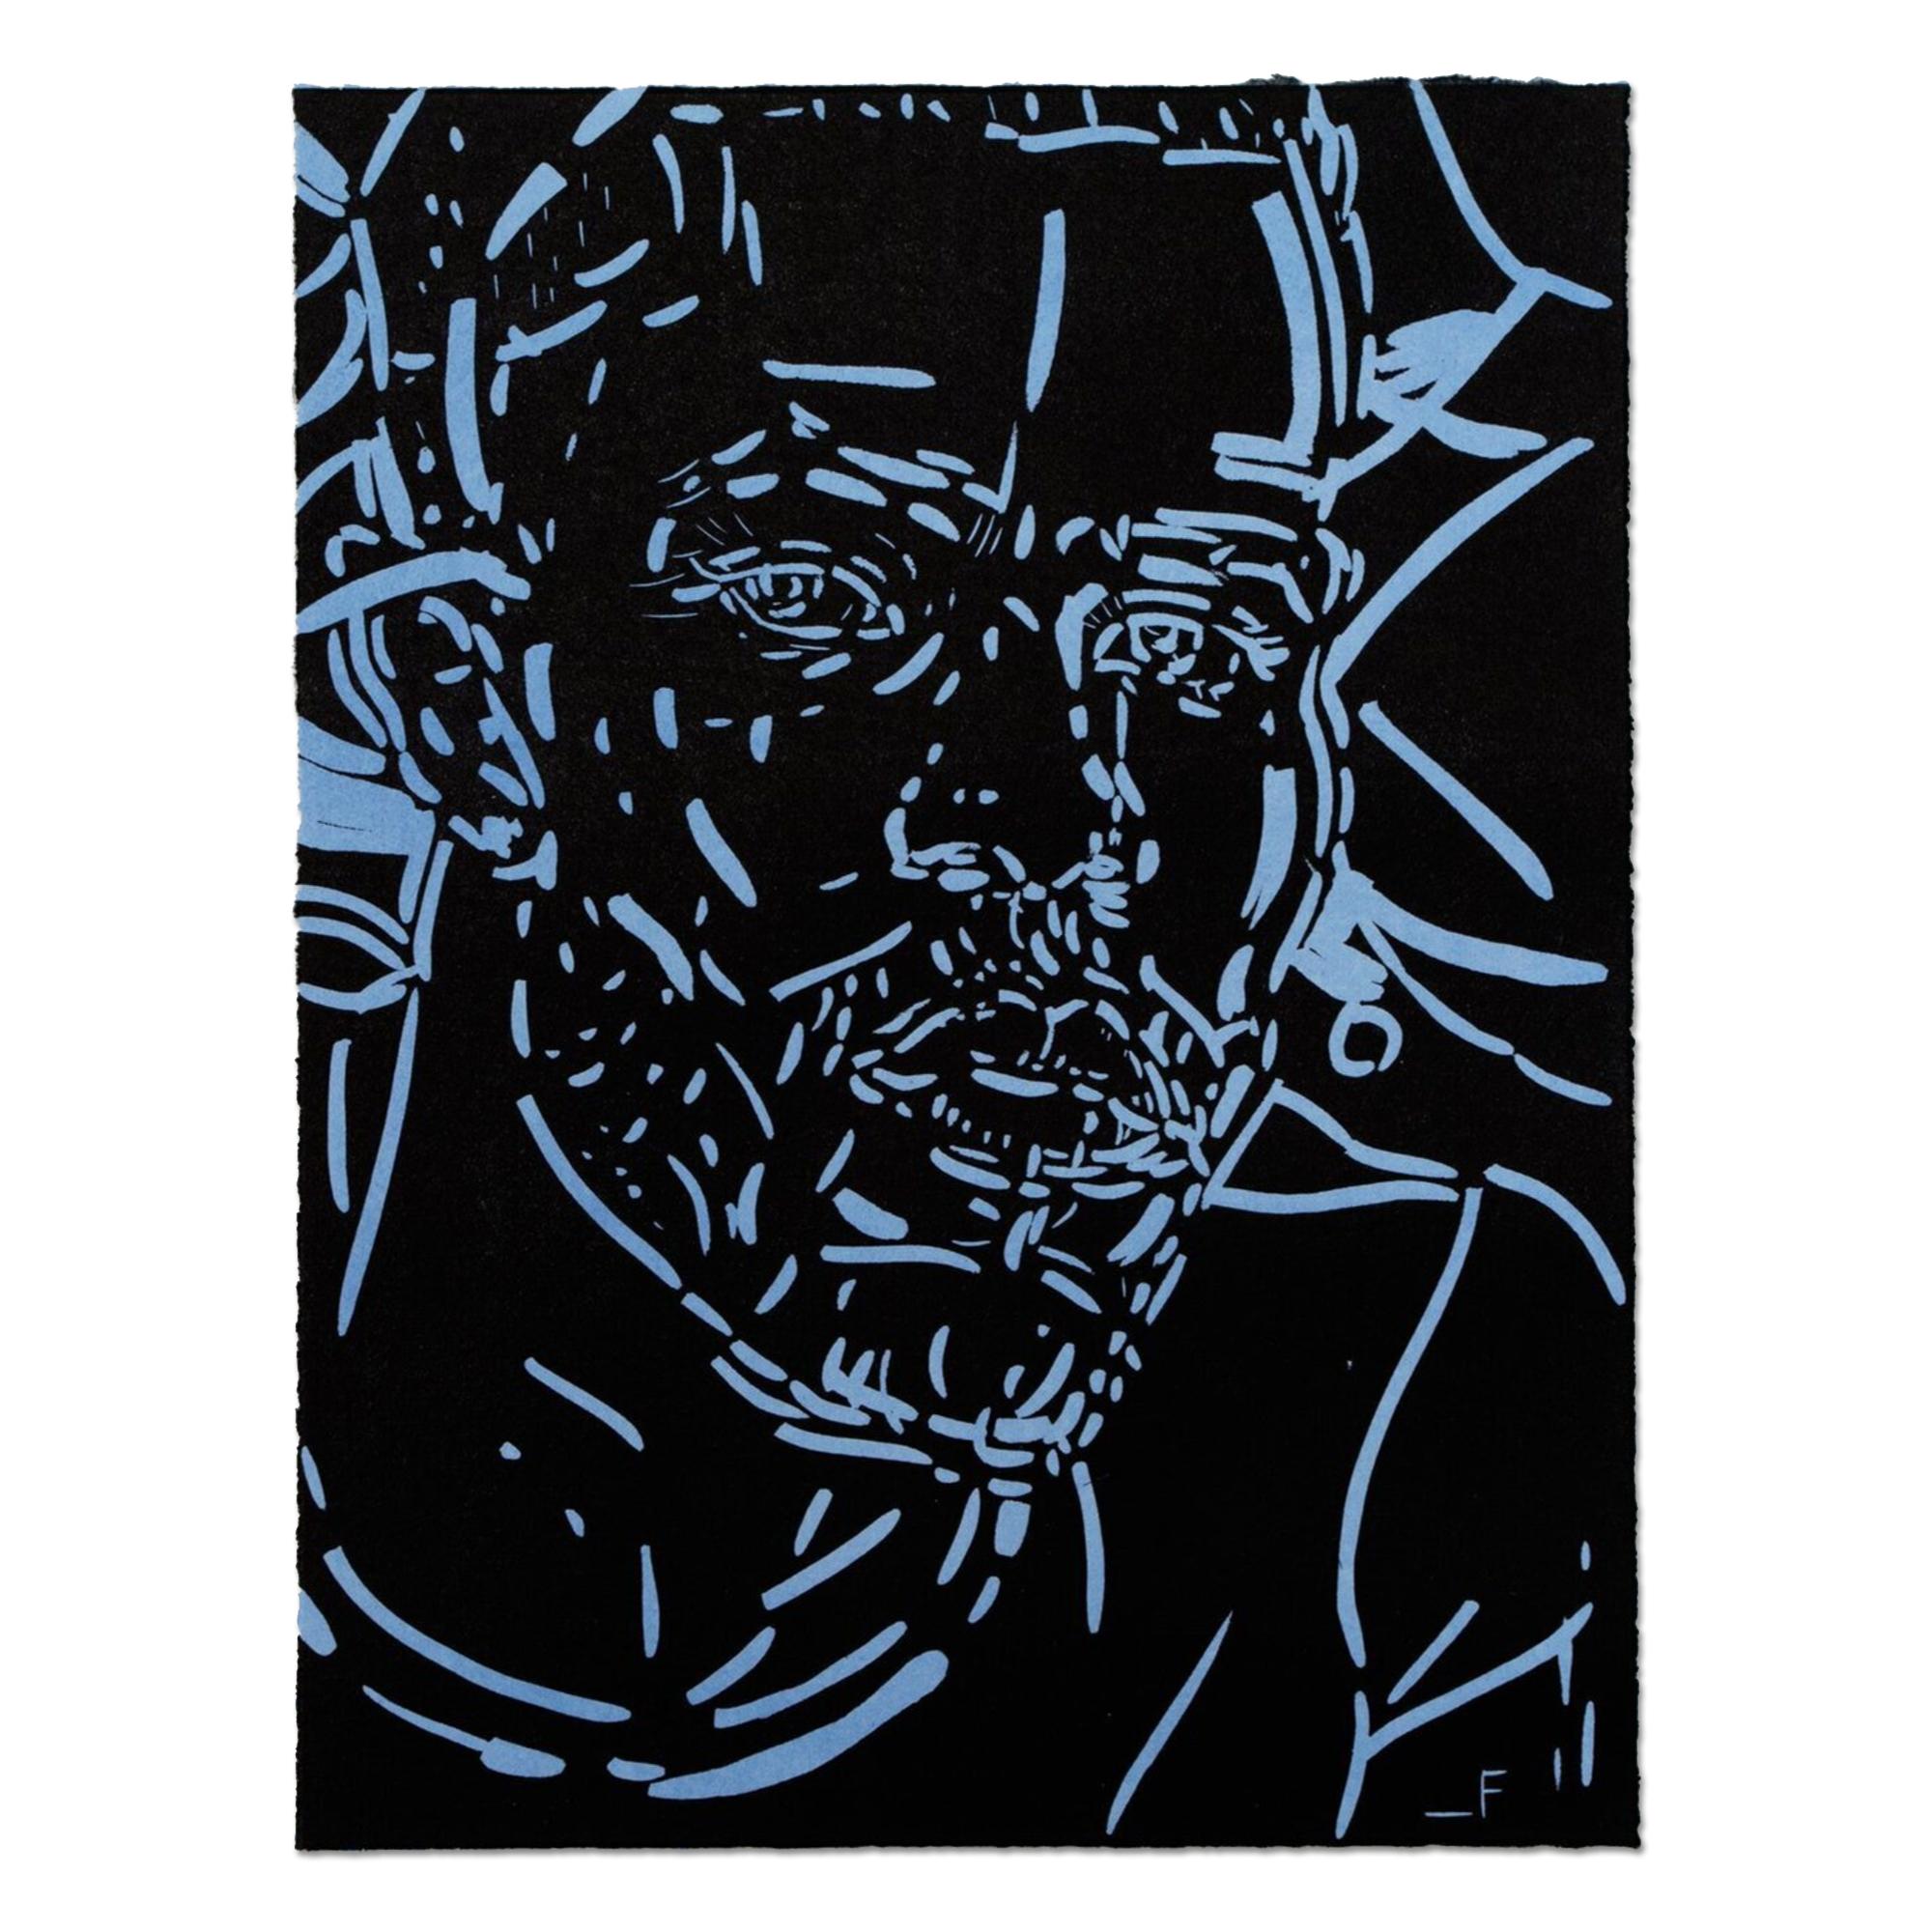 Elizabeth Peyton (American, b. 1965)
Frank Ocean, 2019
Medium: Linocut on colored paper
Dimensions: 39 x 30 cm
Edition of 30: Hand-signed and numbered
Condition: Mint